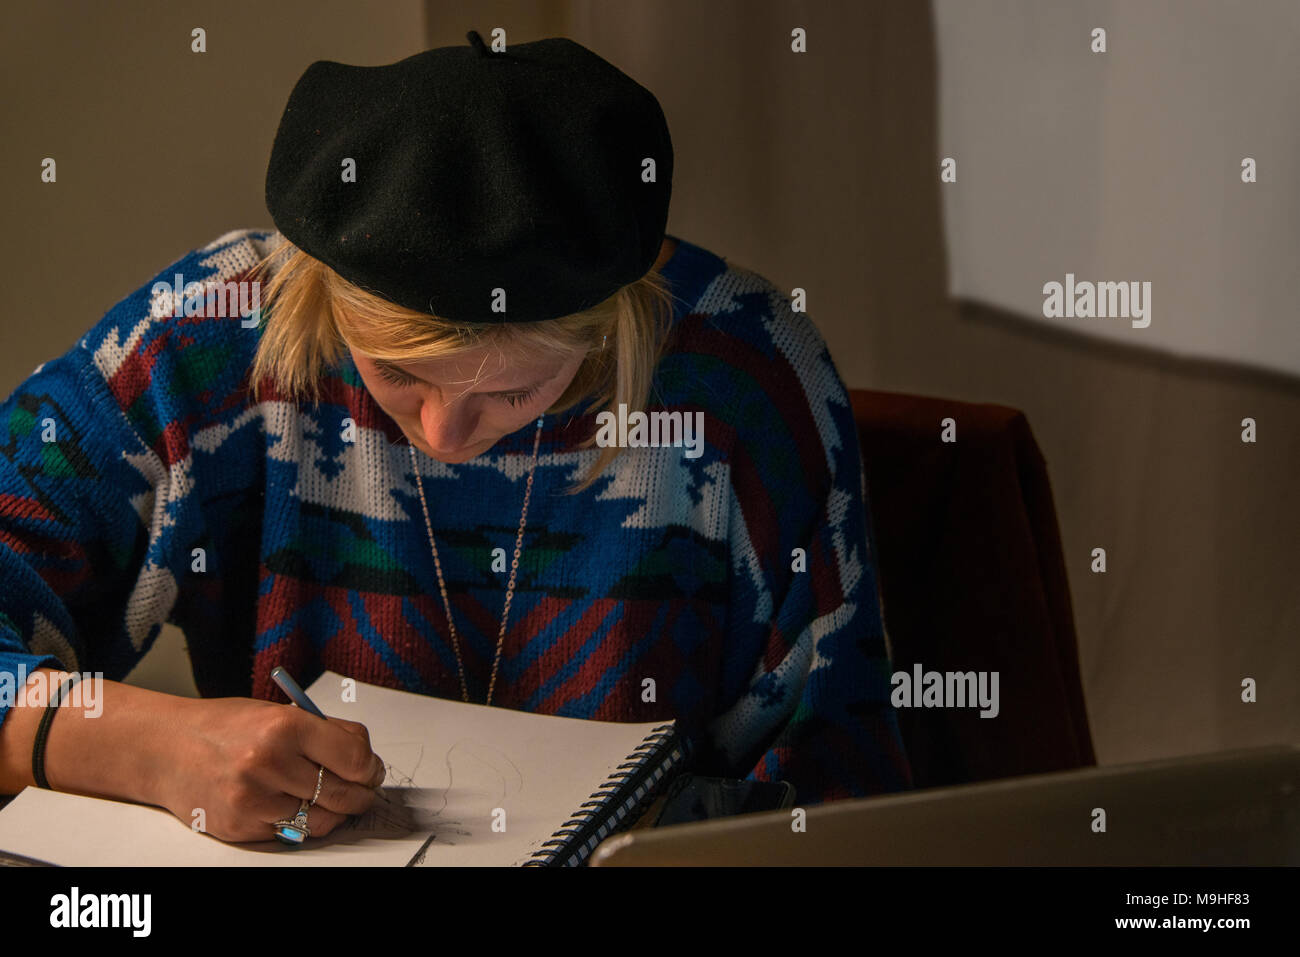 Woman wearing a beret, sketching on an art pad. Stock Photo